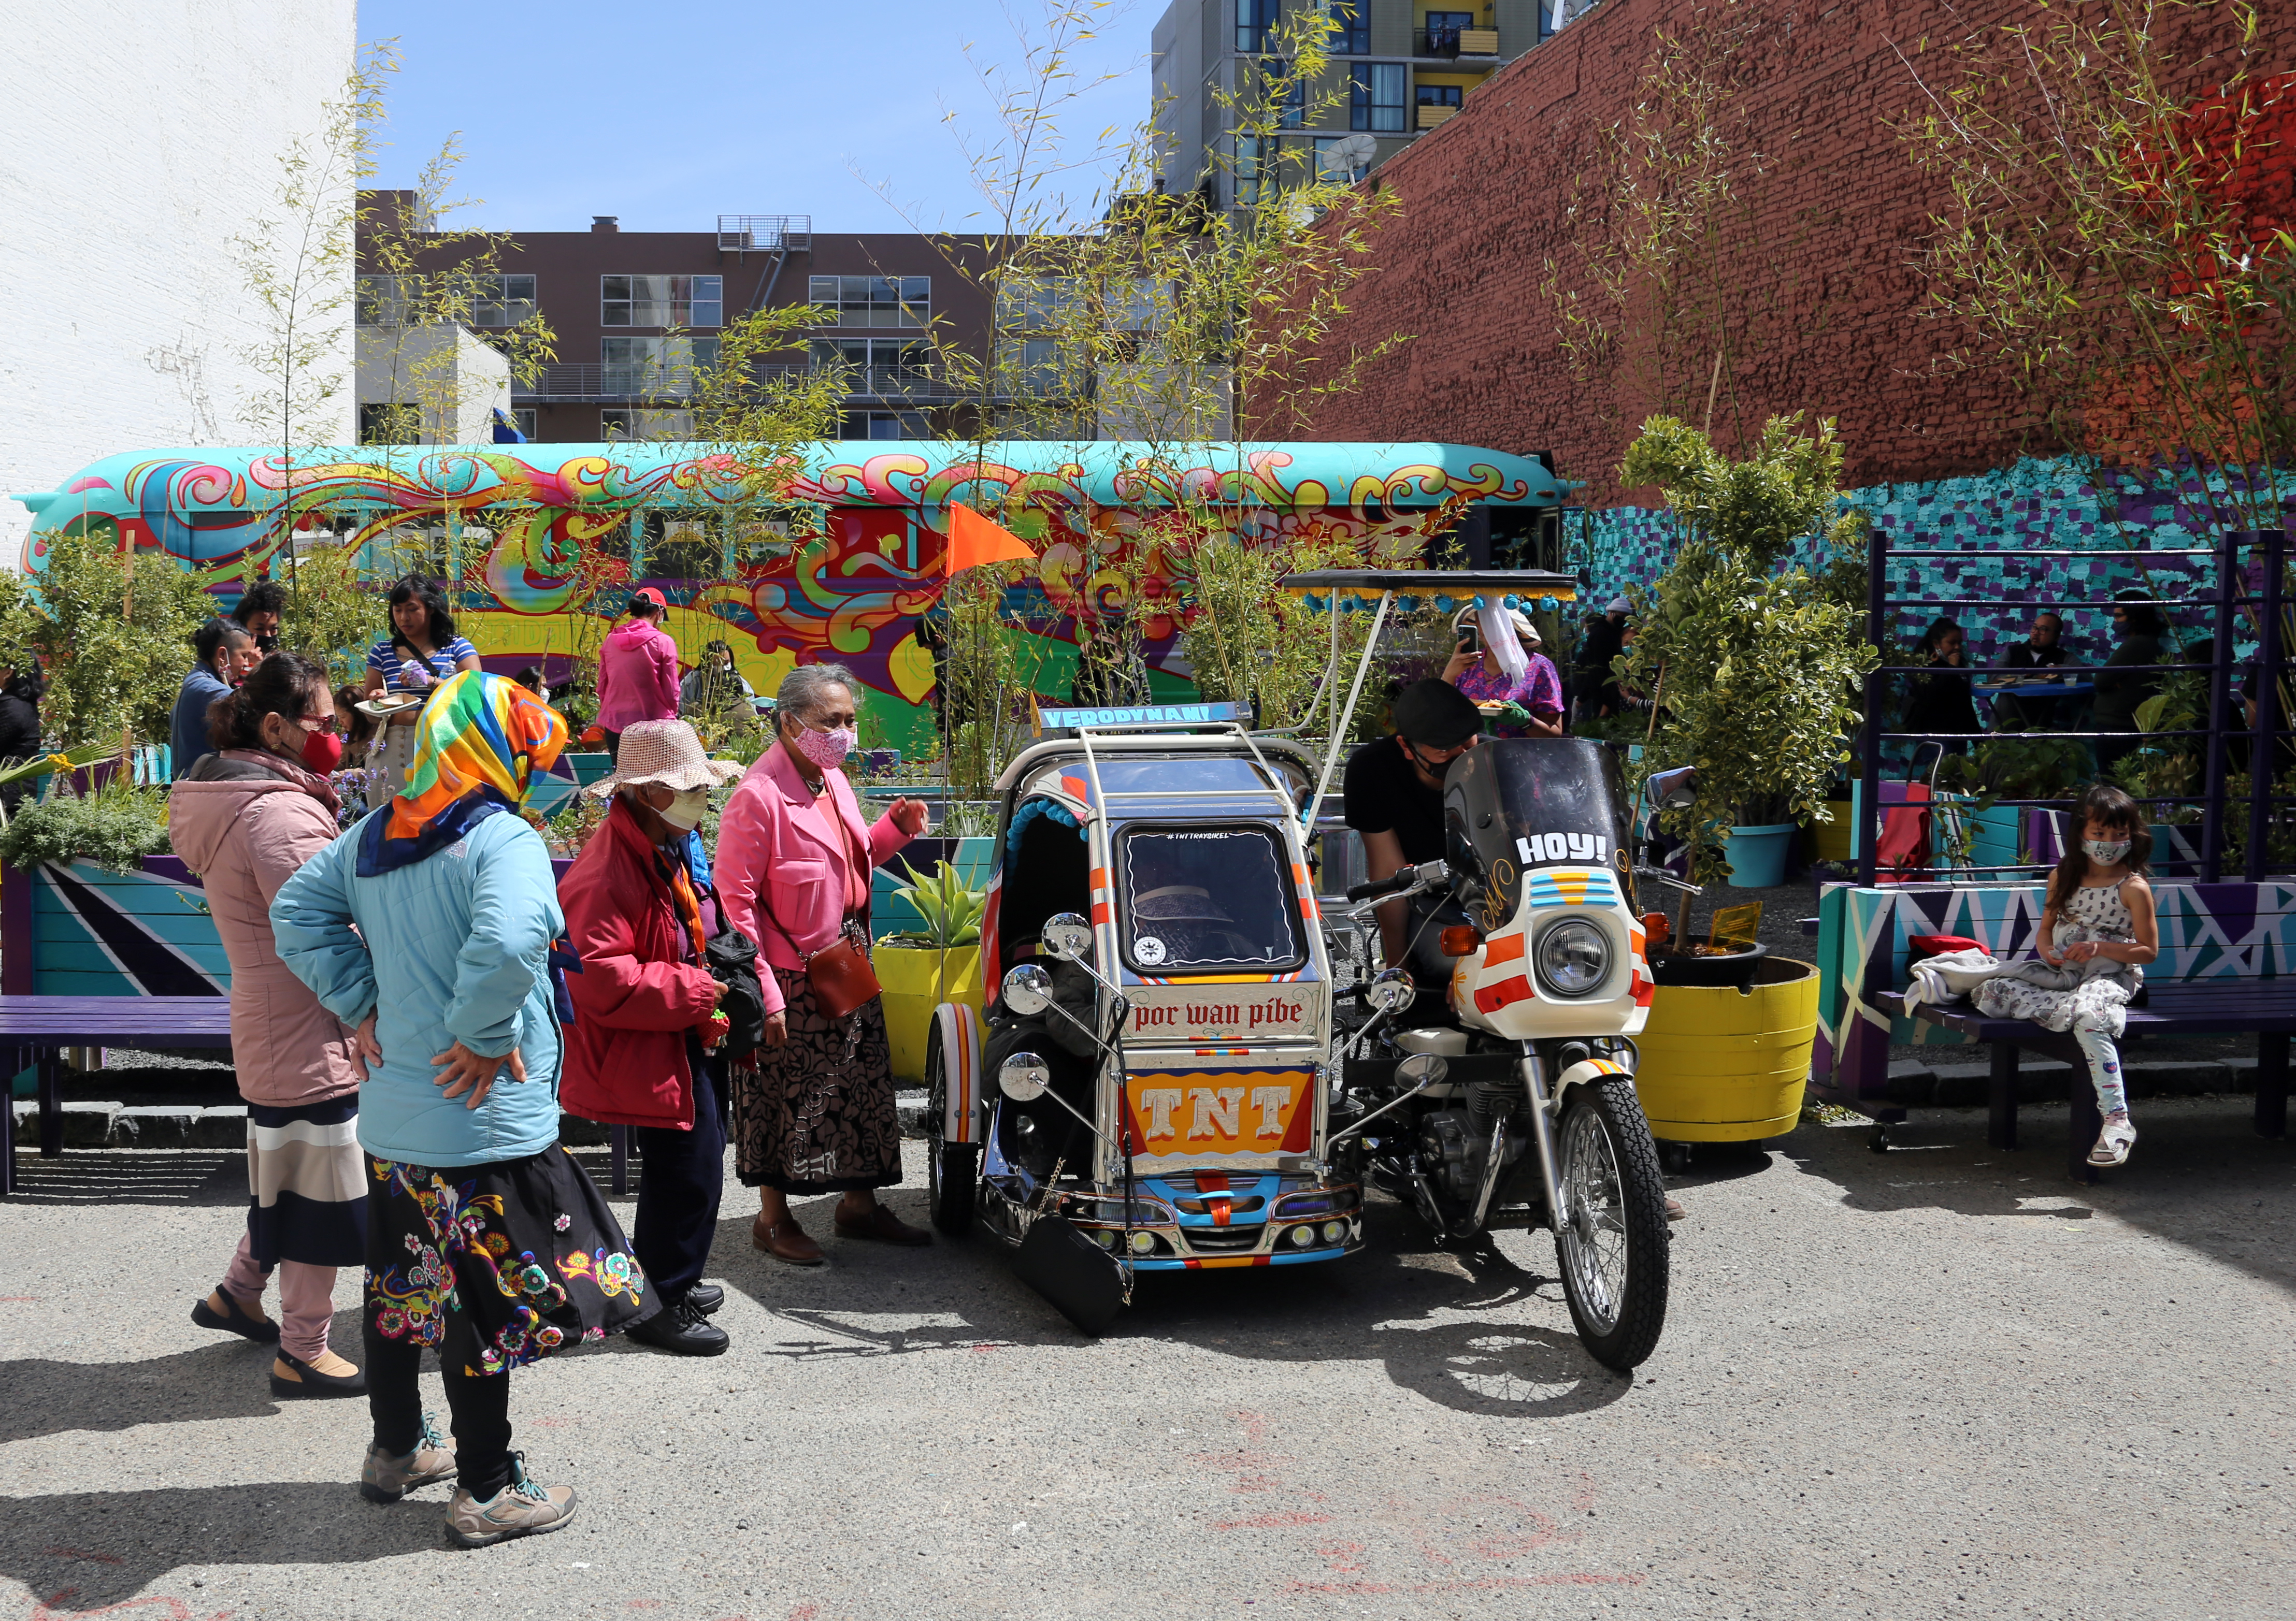 5 people standing outside in a colorful garden with a motorbike and bus